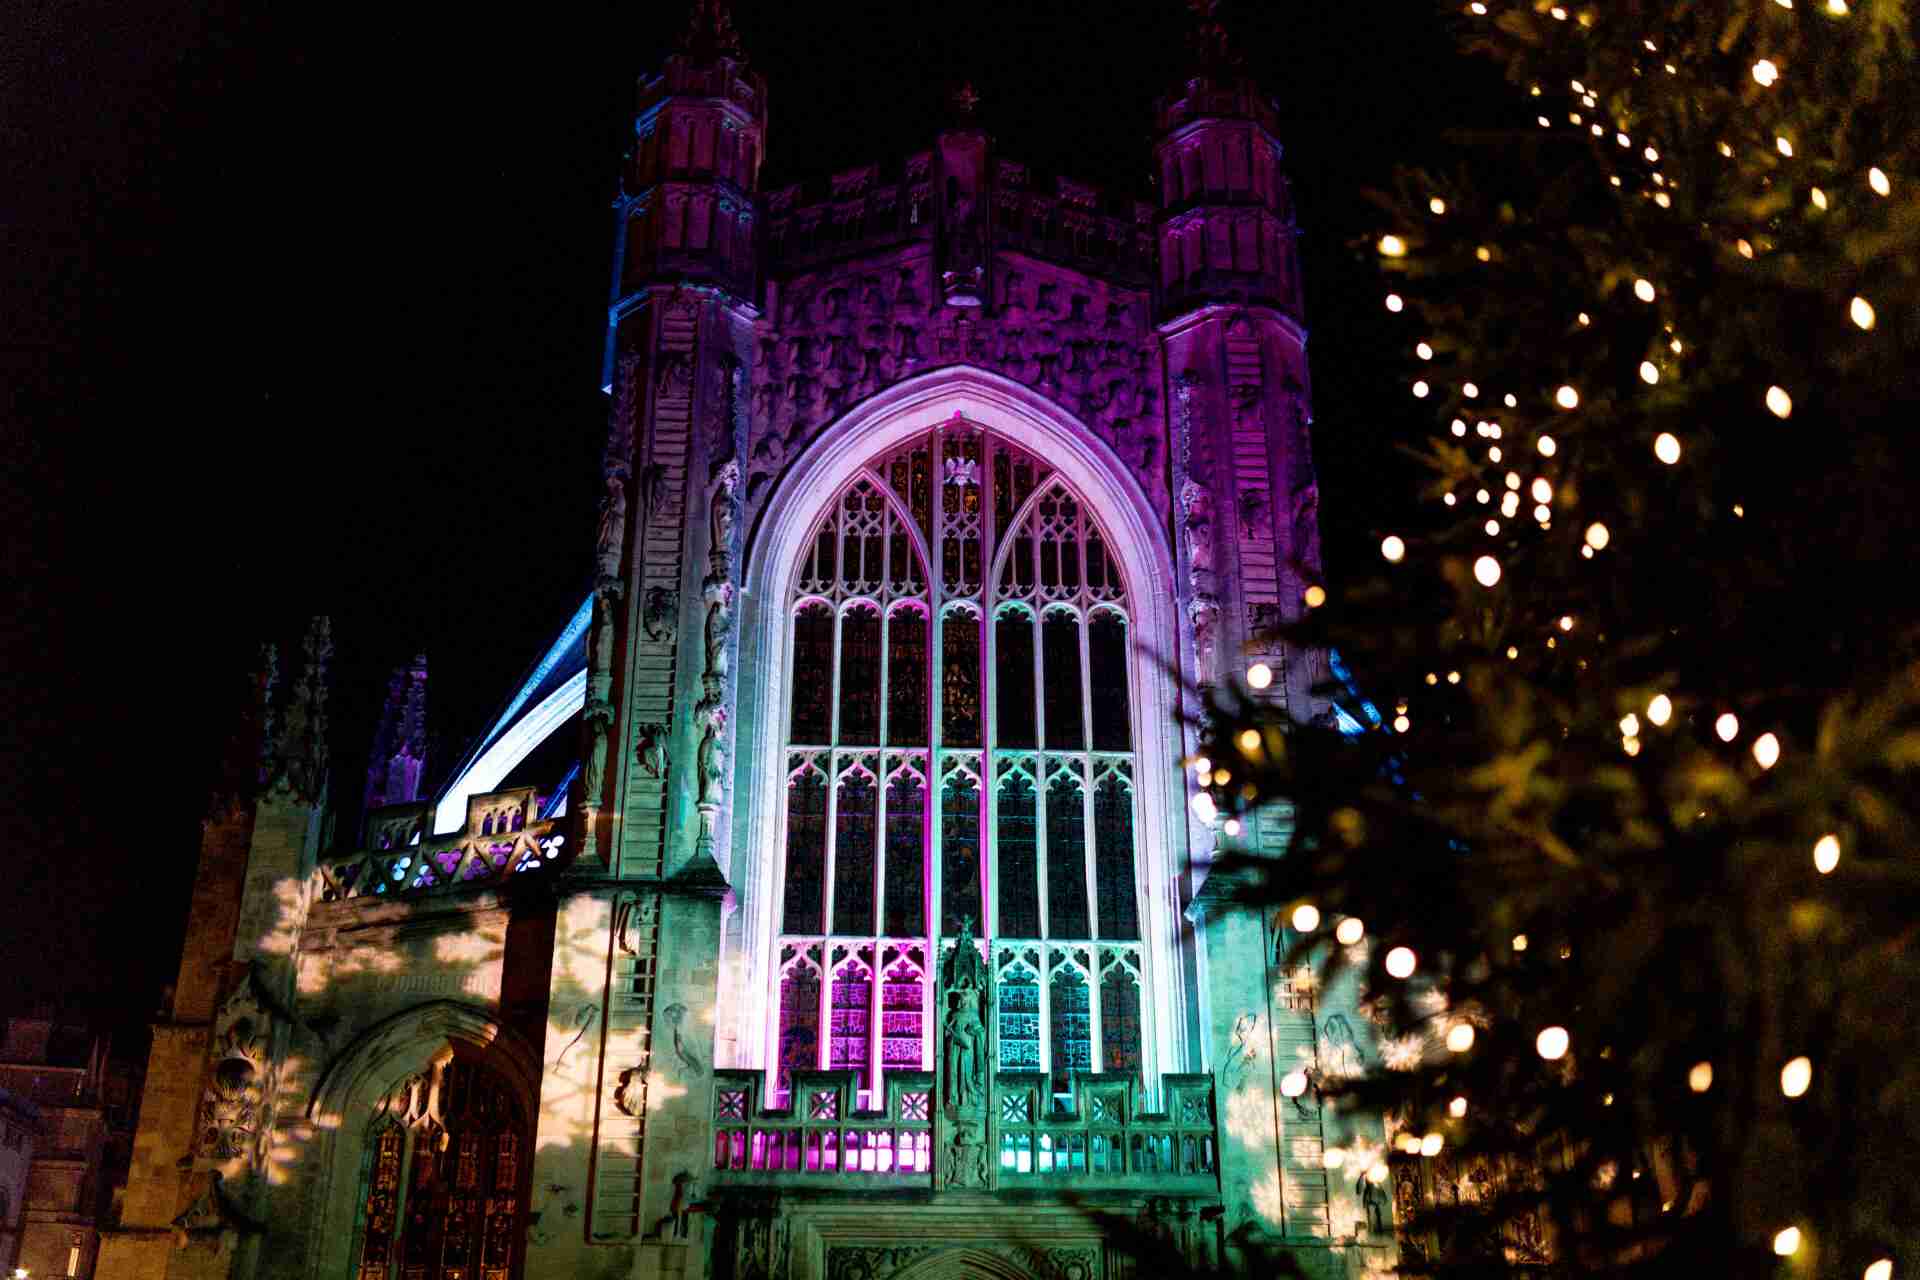 Bath Abbey lit up with colourful lights and a Christmas Tree with gold lights